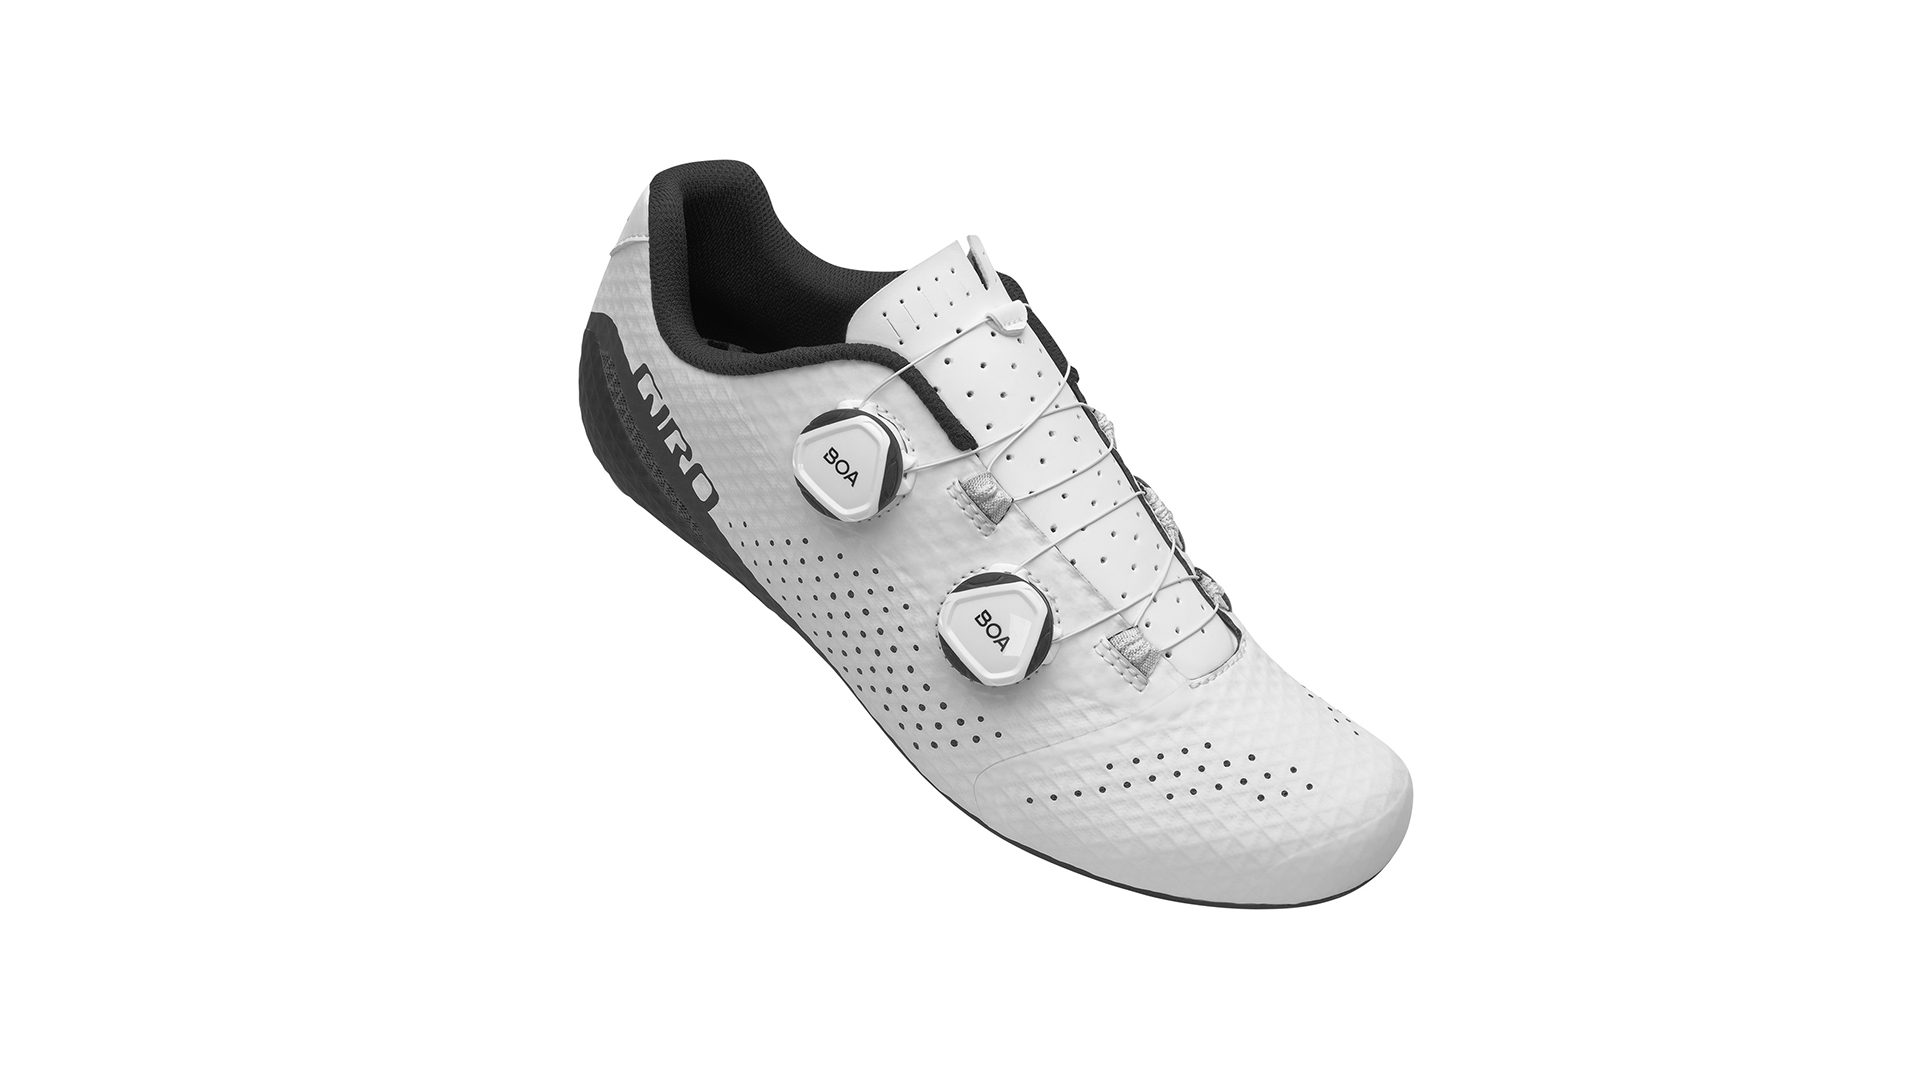 Best shoes for Peloton: Product image of cycling shoes